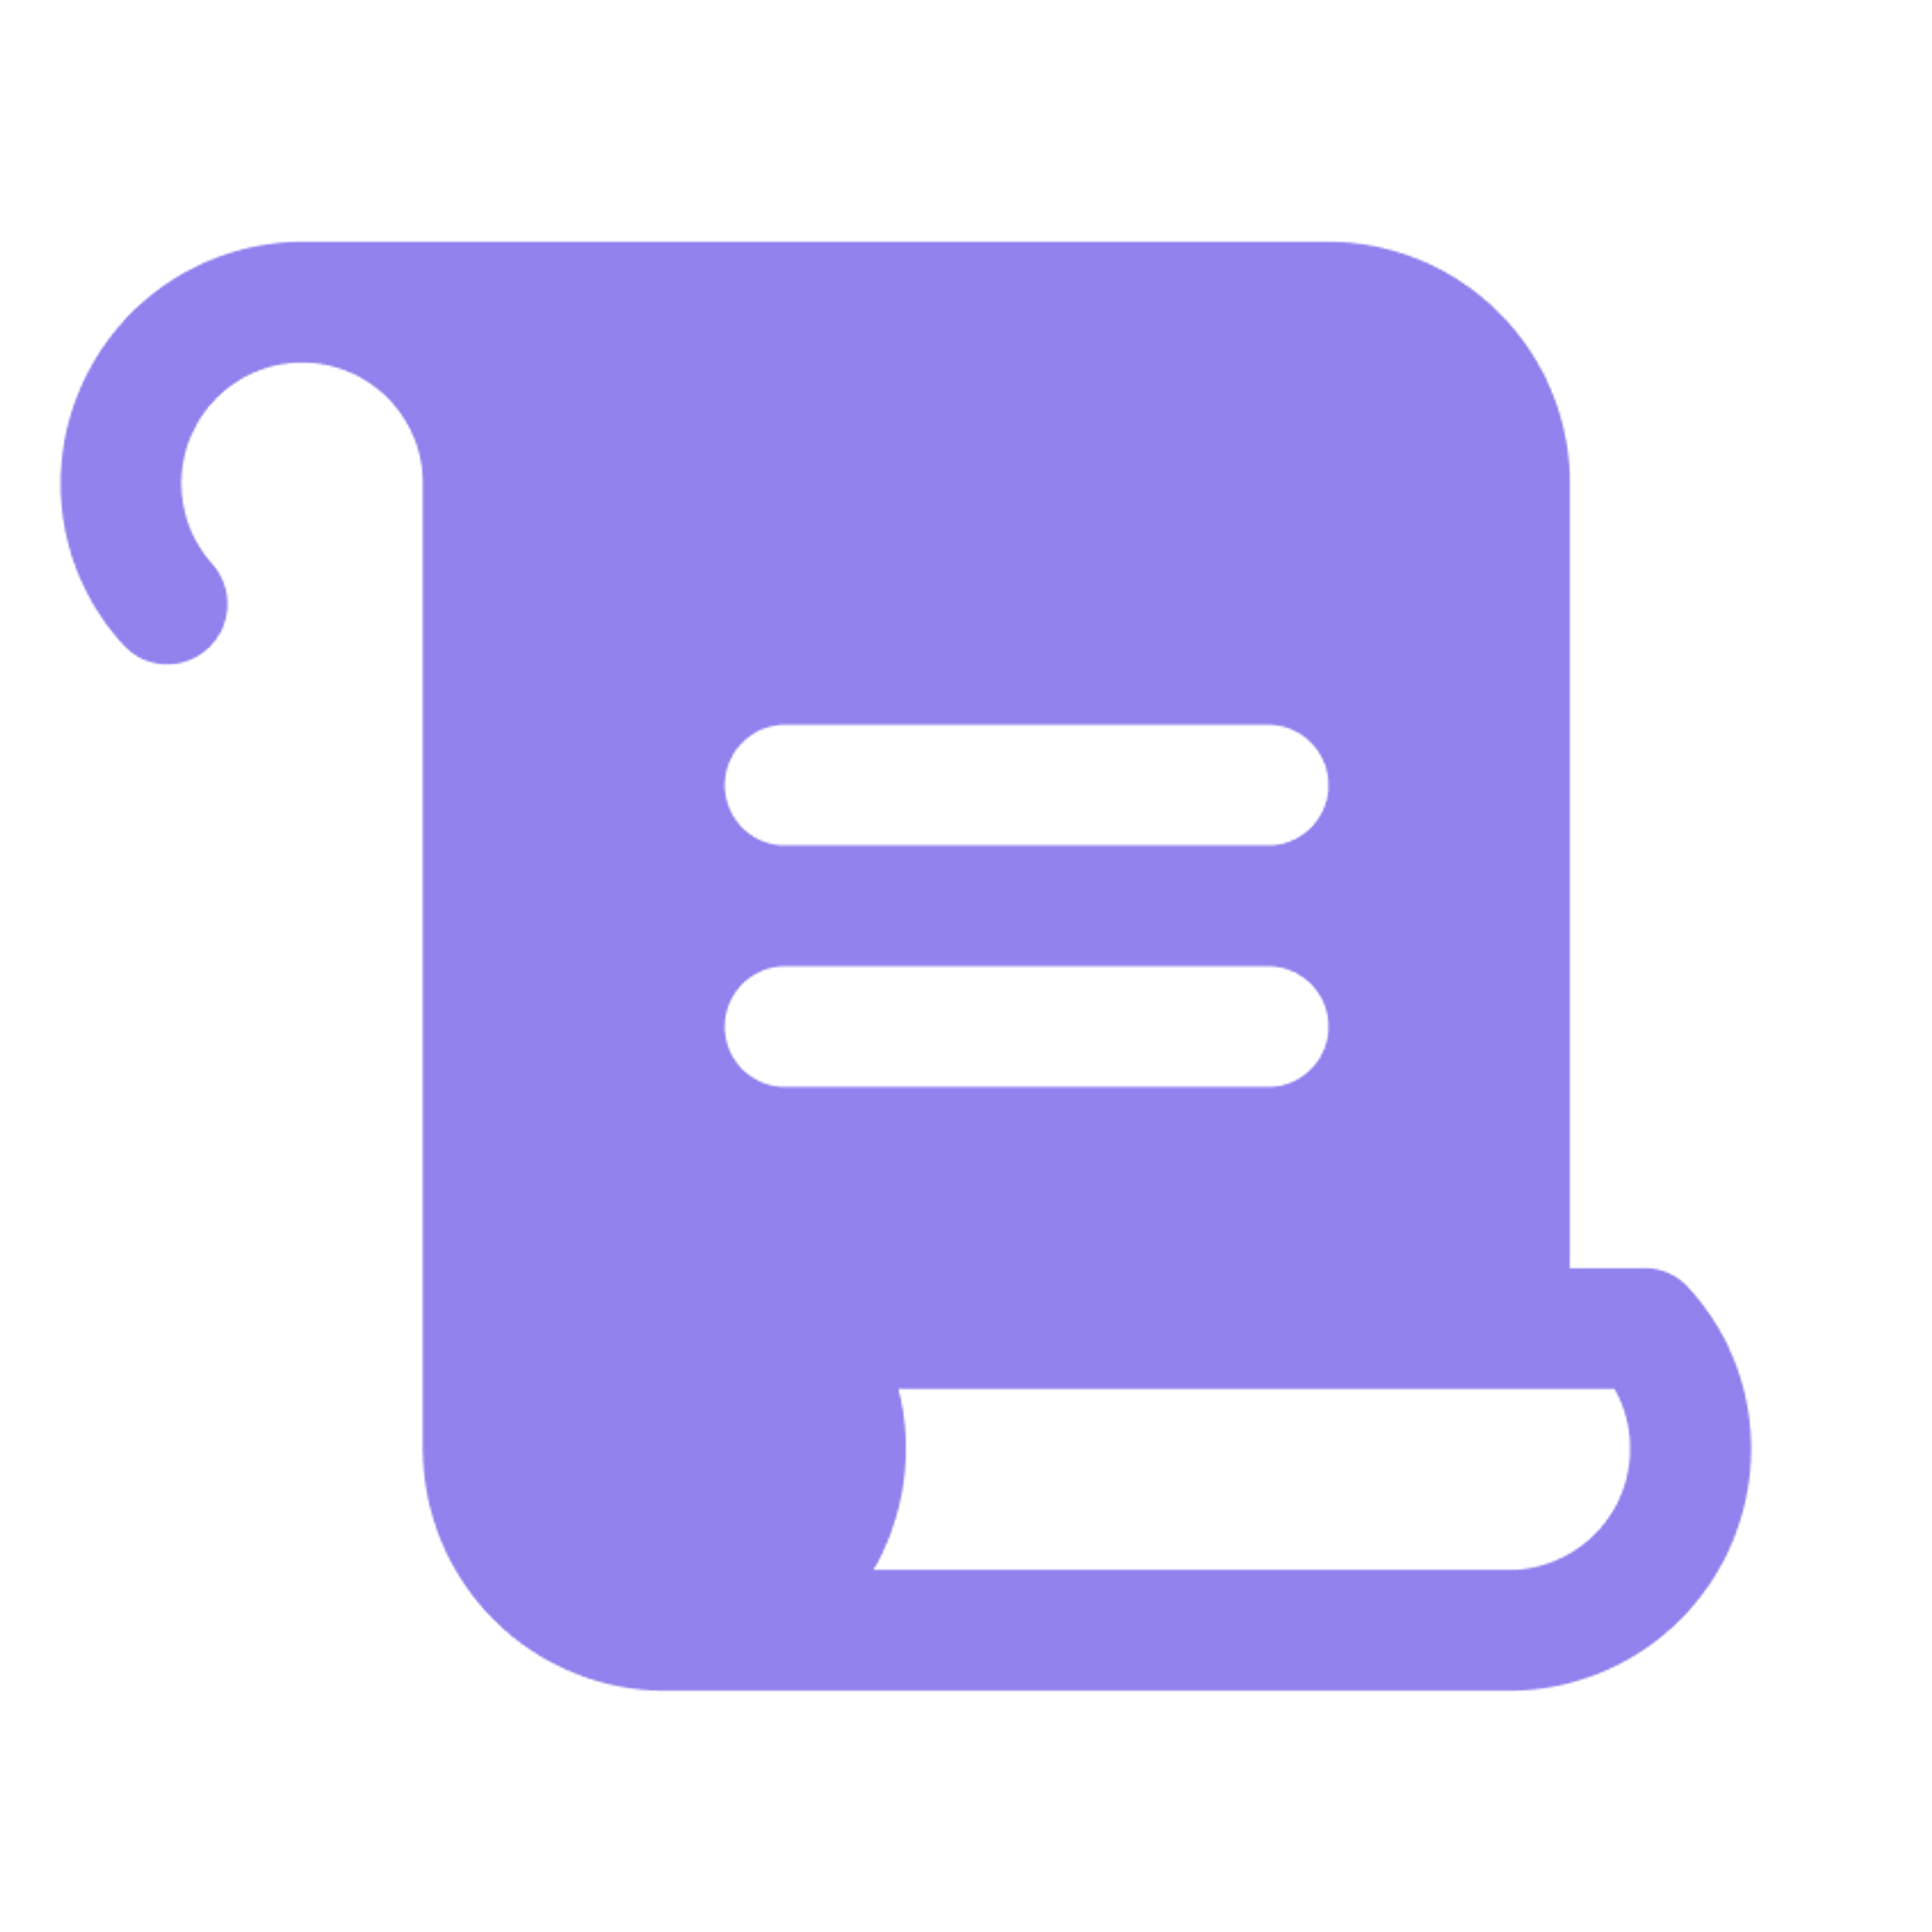 A purple icon of a paper scroll on a transparent background